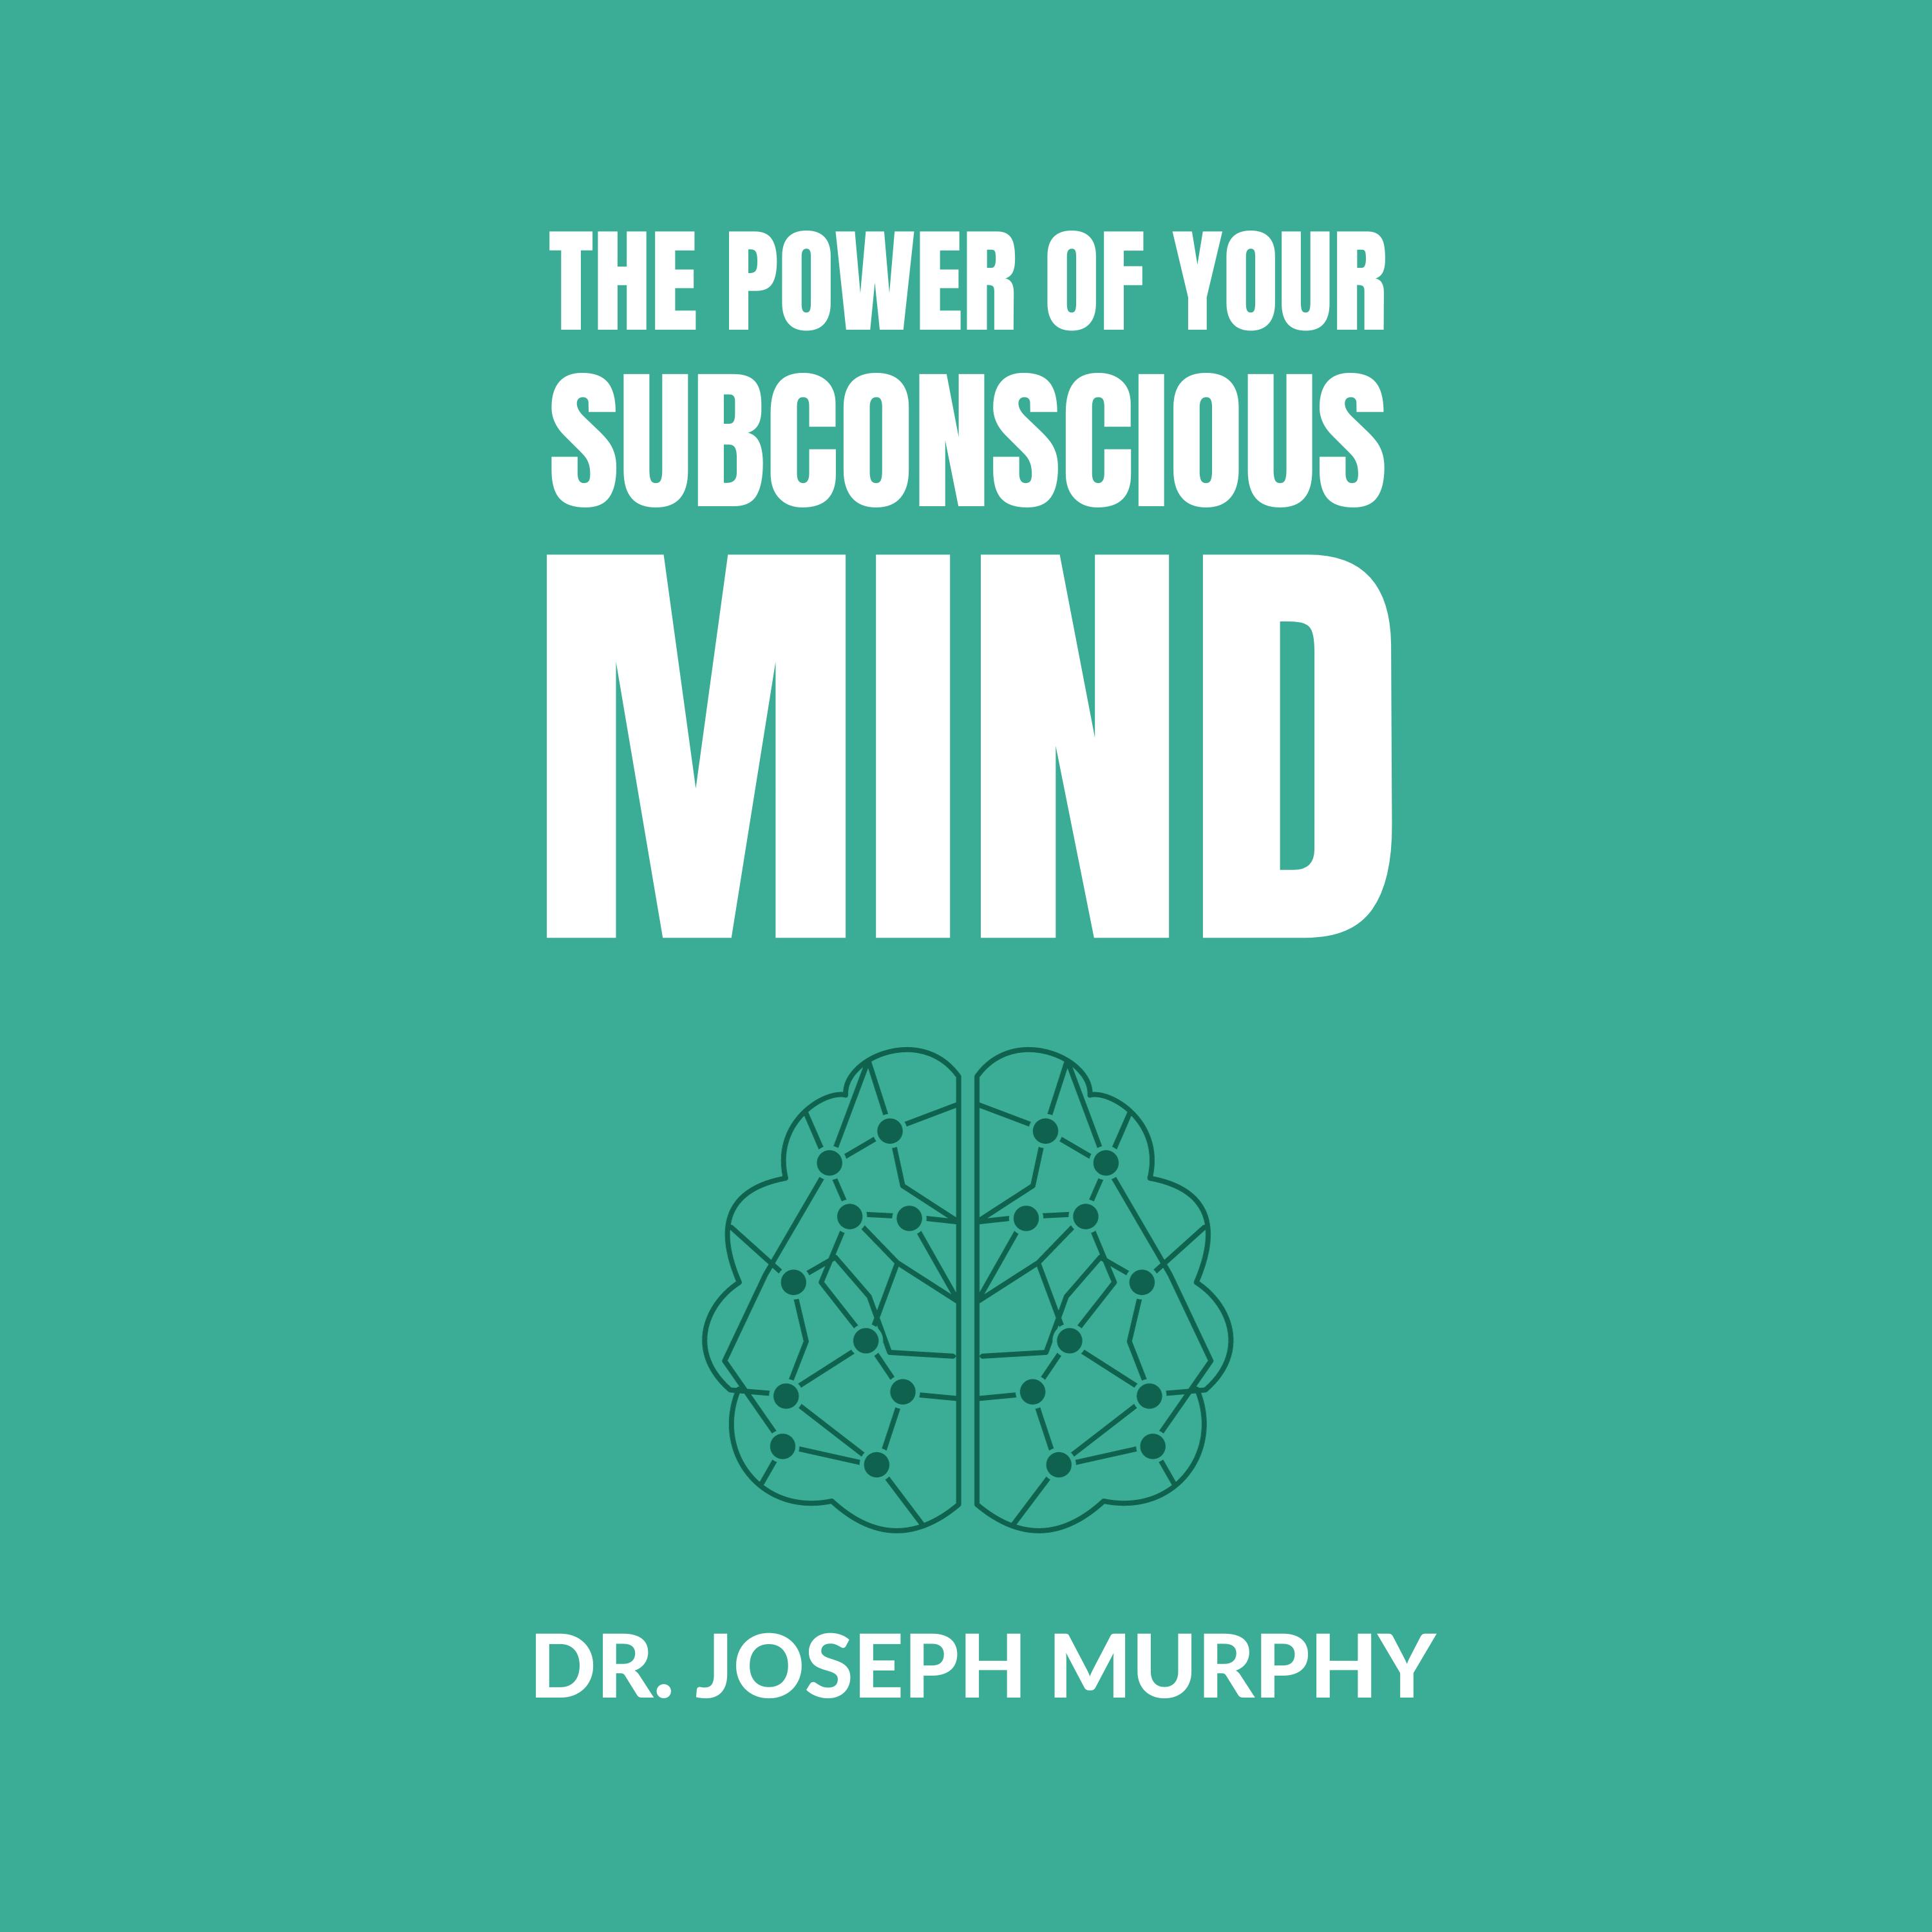 The Power of Your Subconscious Mind by Joseph Murphy | Book Summary and Review